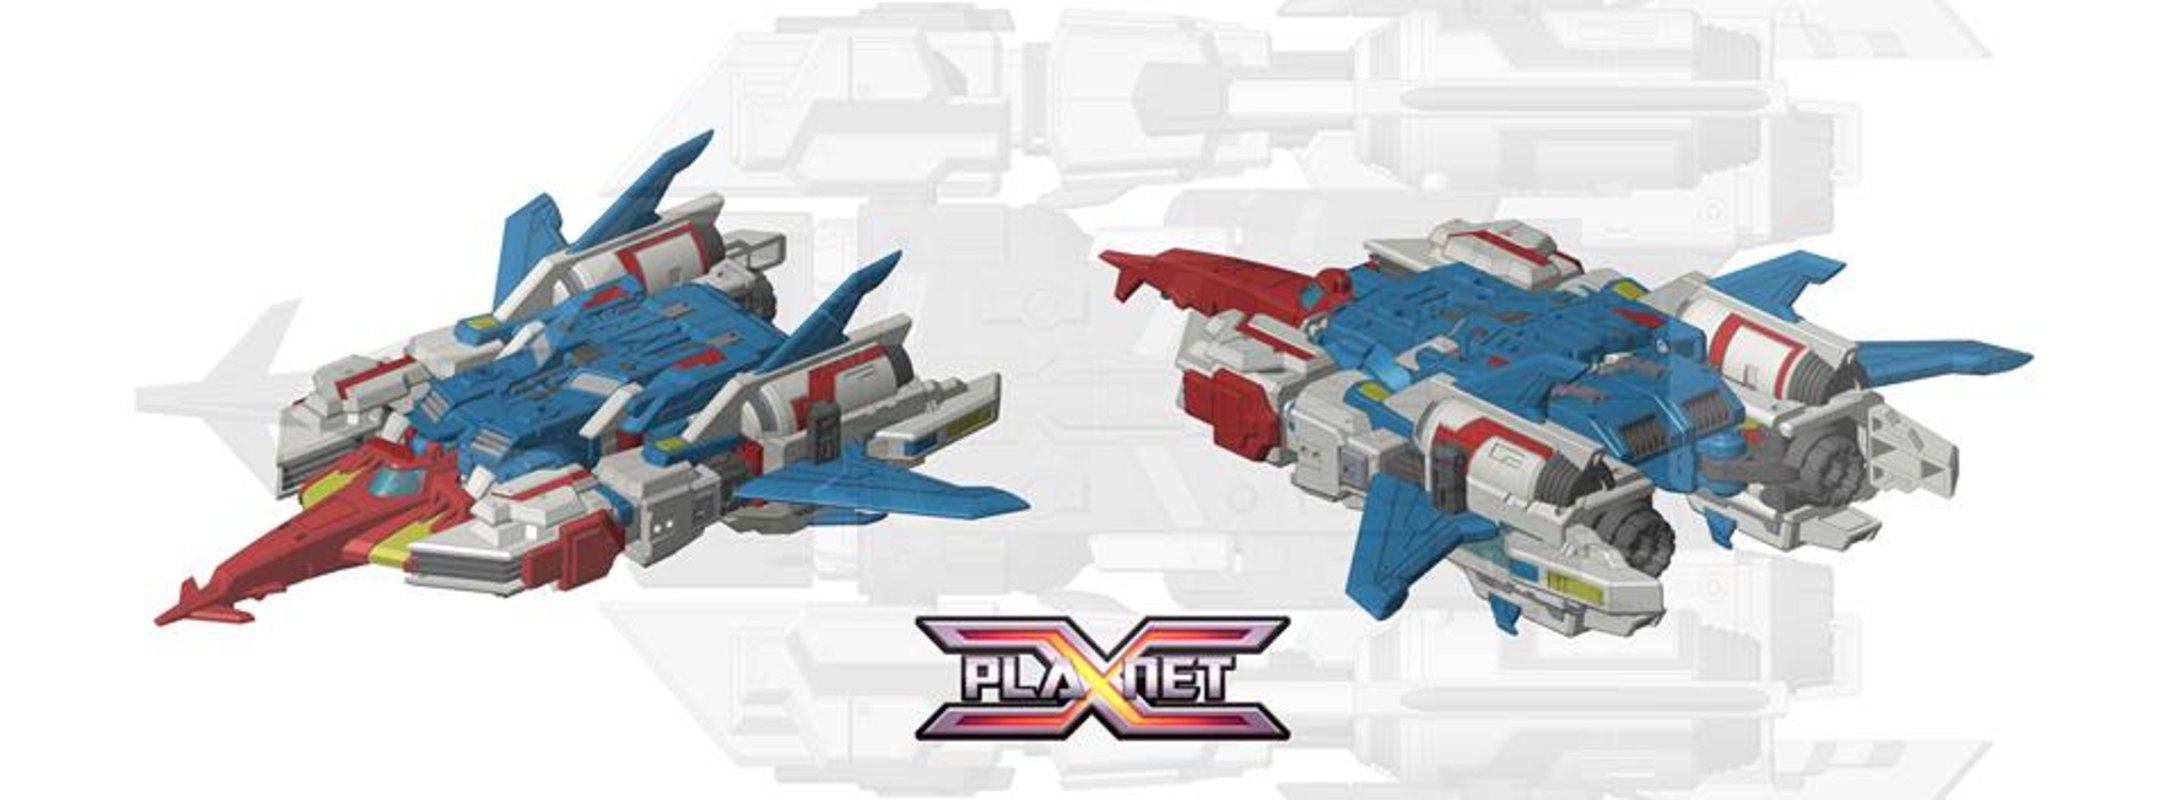 Planet X PX-C02 Kadmos - Renders Of Unofficial Third-Party Star Saber